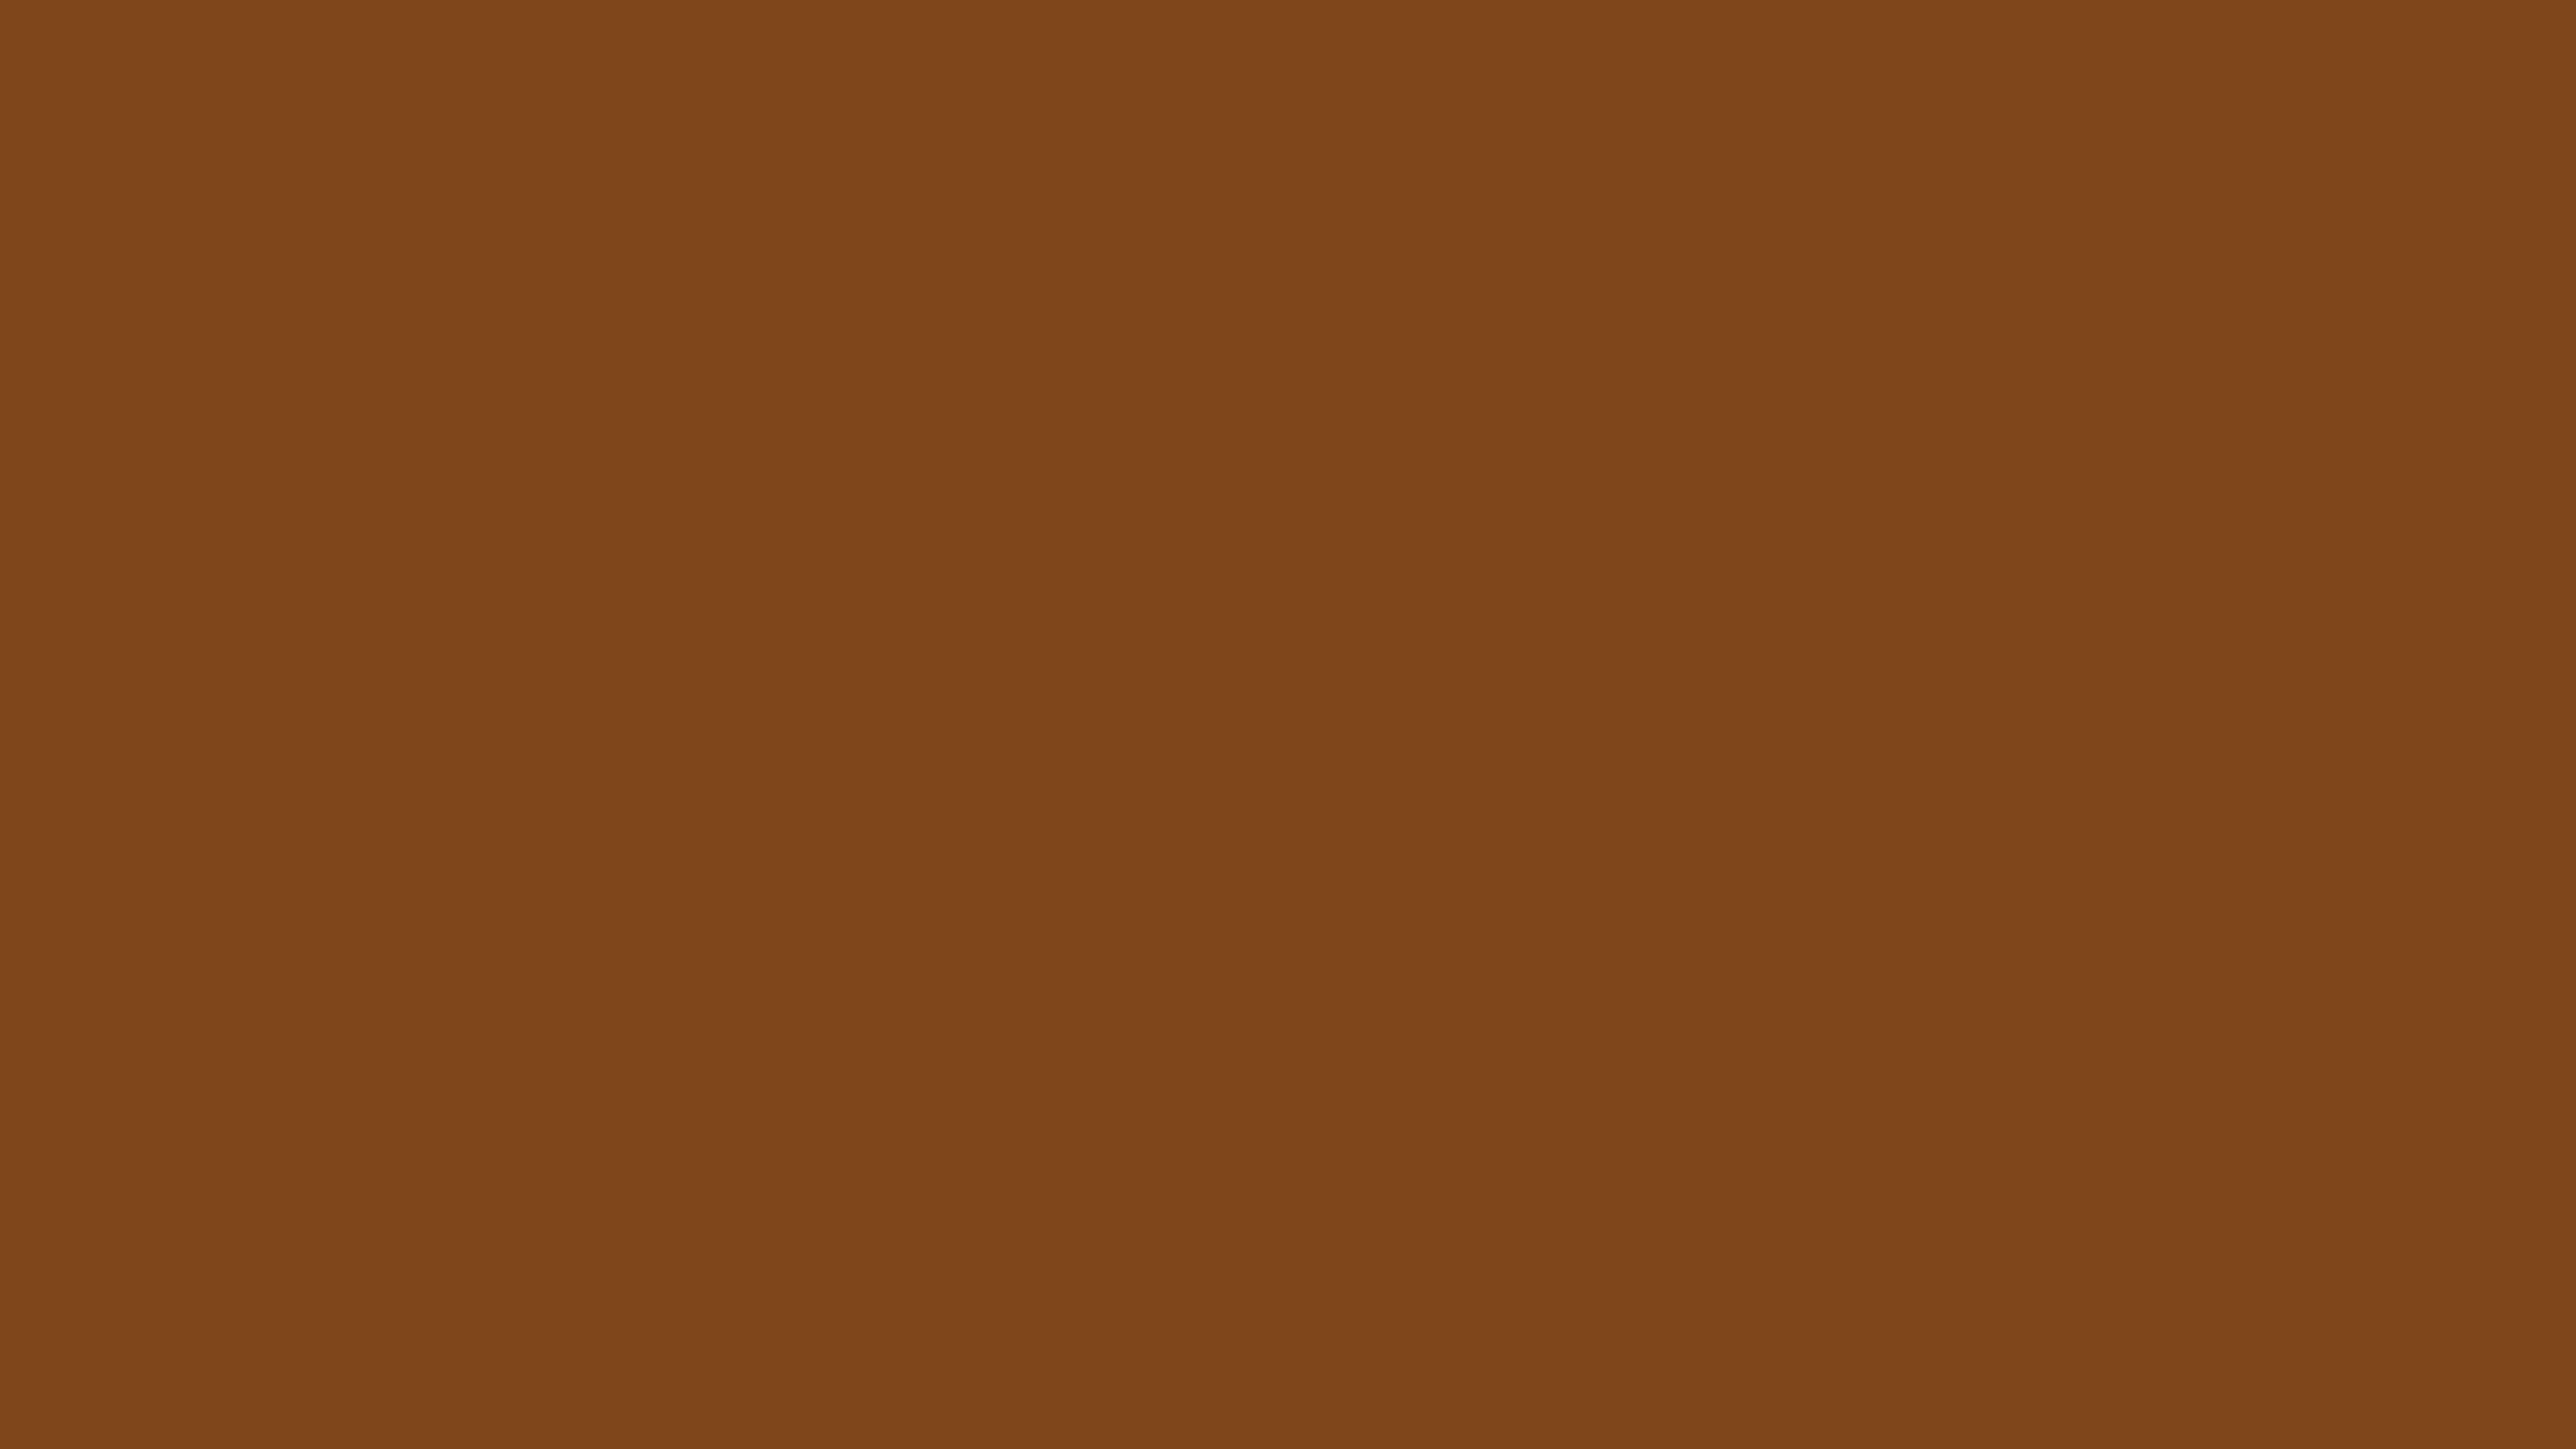 5120x2880 Russet Solid Color Background